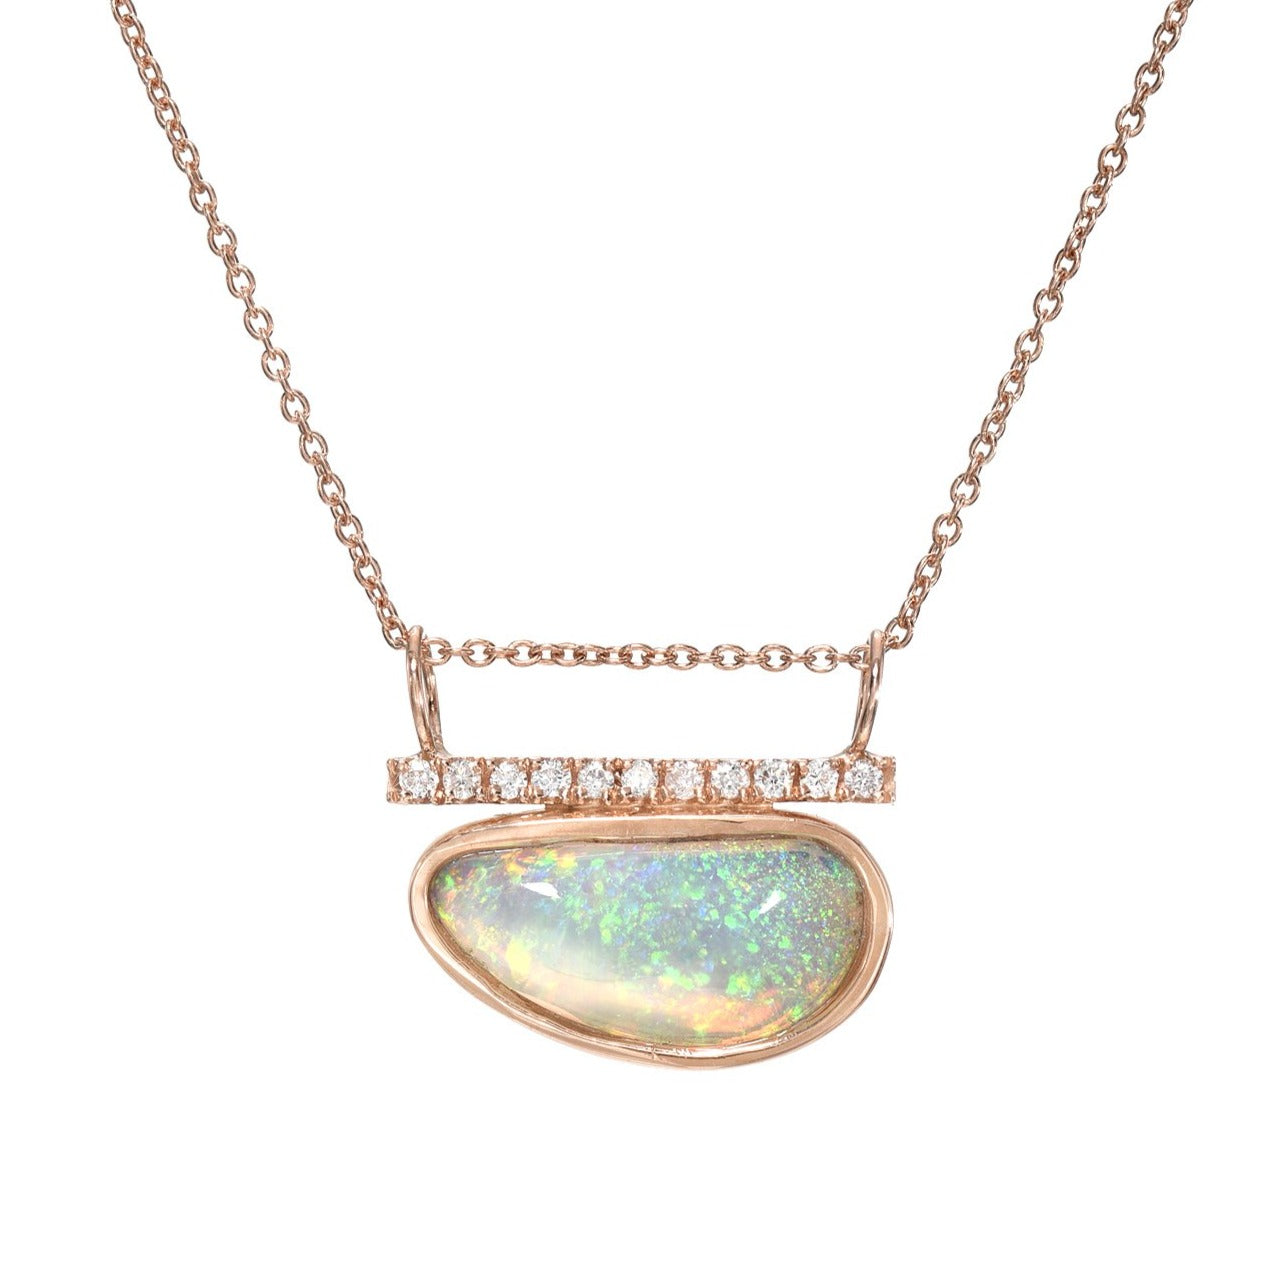 Head in the Clouds Crystal Opal Necklace No. 16 by NIXIN Jewelry against white background